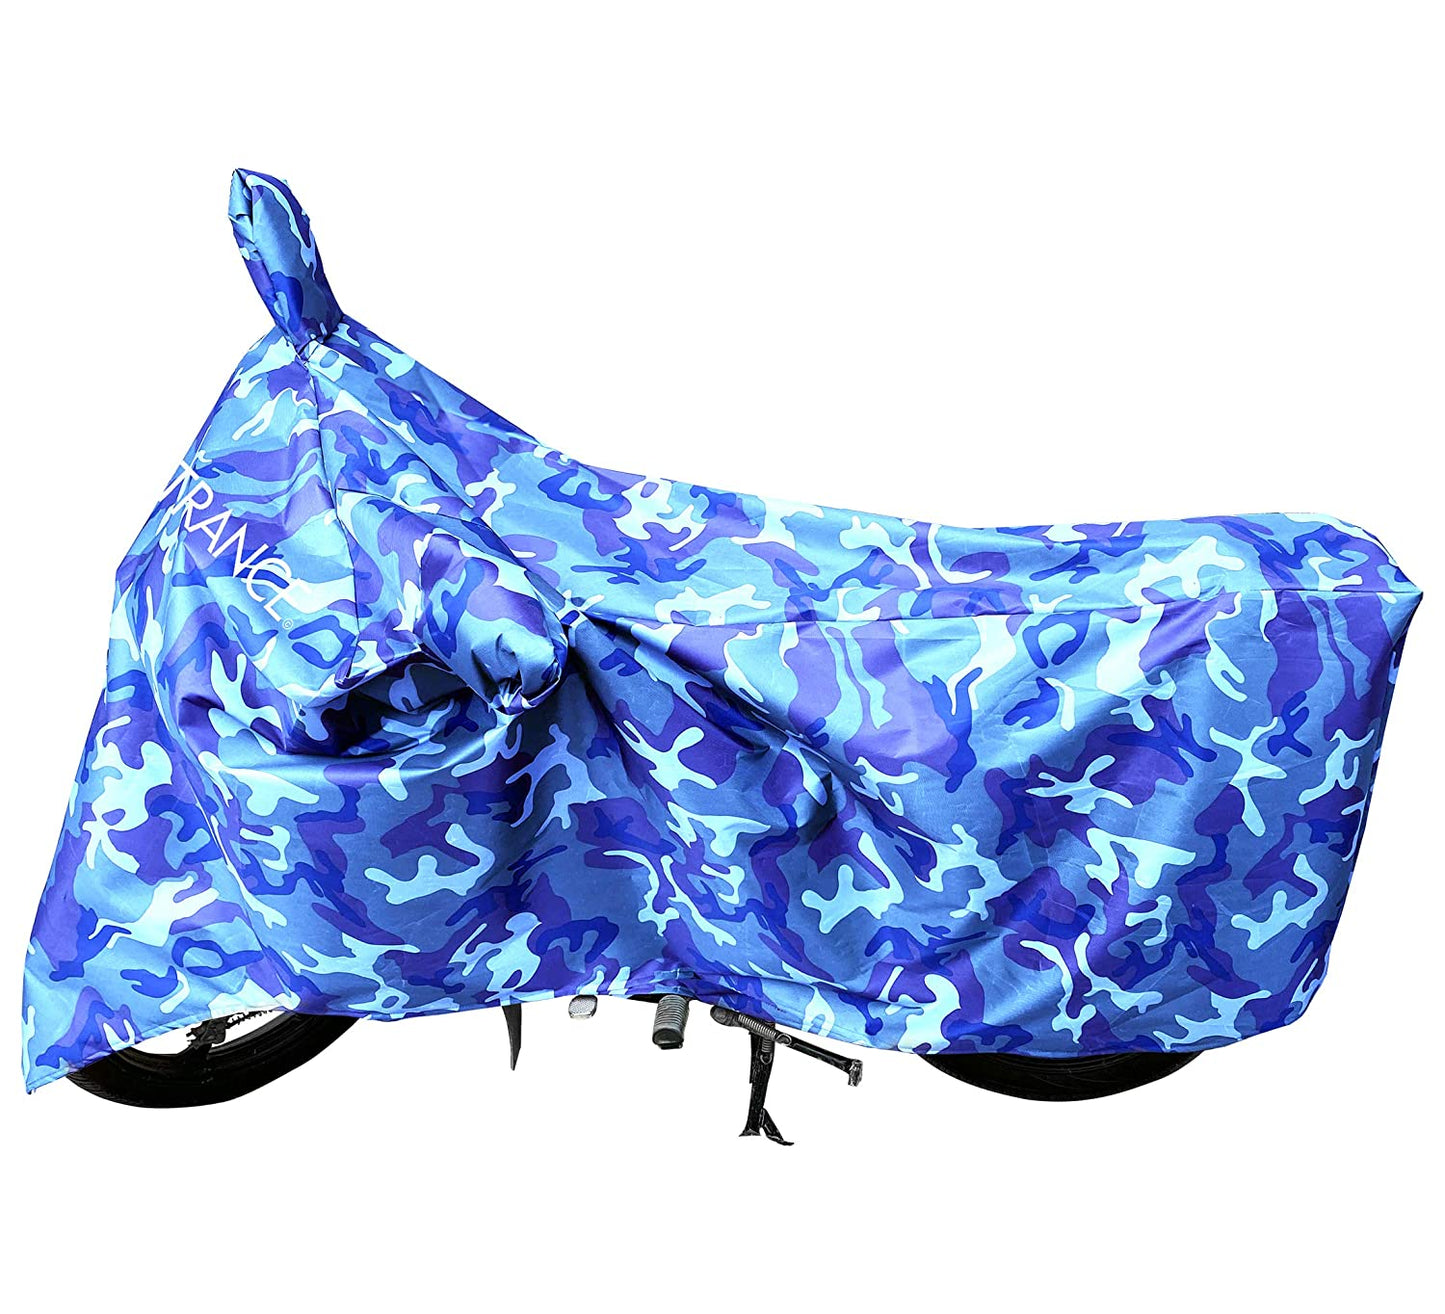 MotoTrance Jungle Bike Body Covers For Honda Activa 4G - Interlock-Stitched Waterproof and Heat Resistant with Mirror Pockets